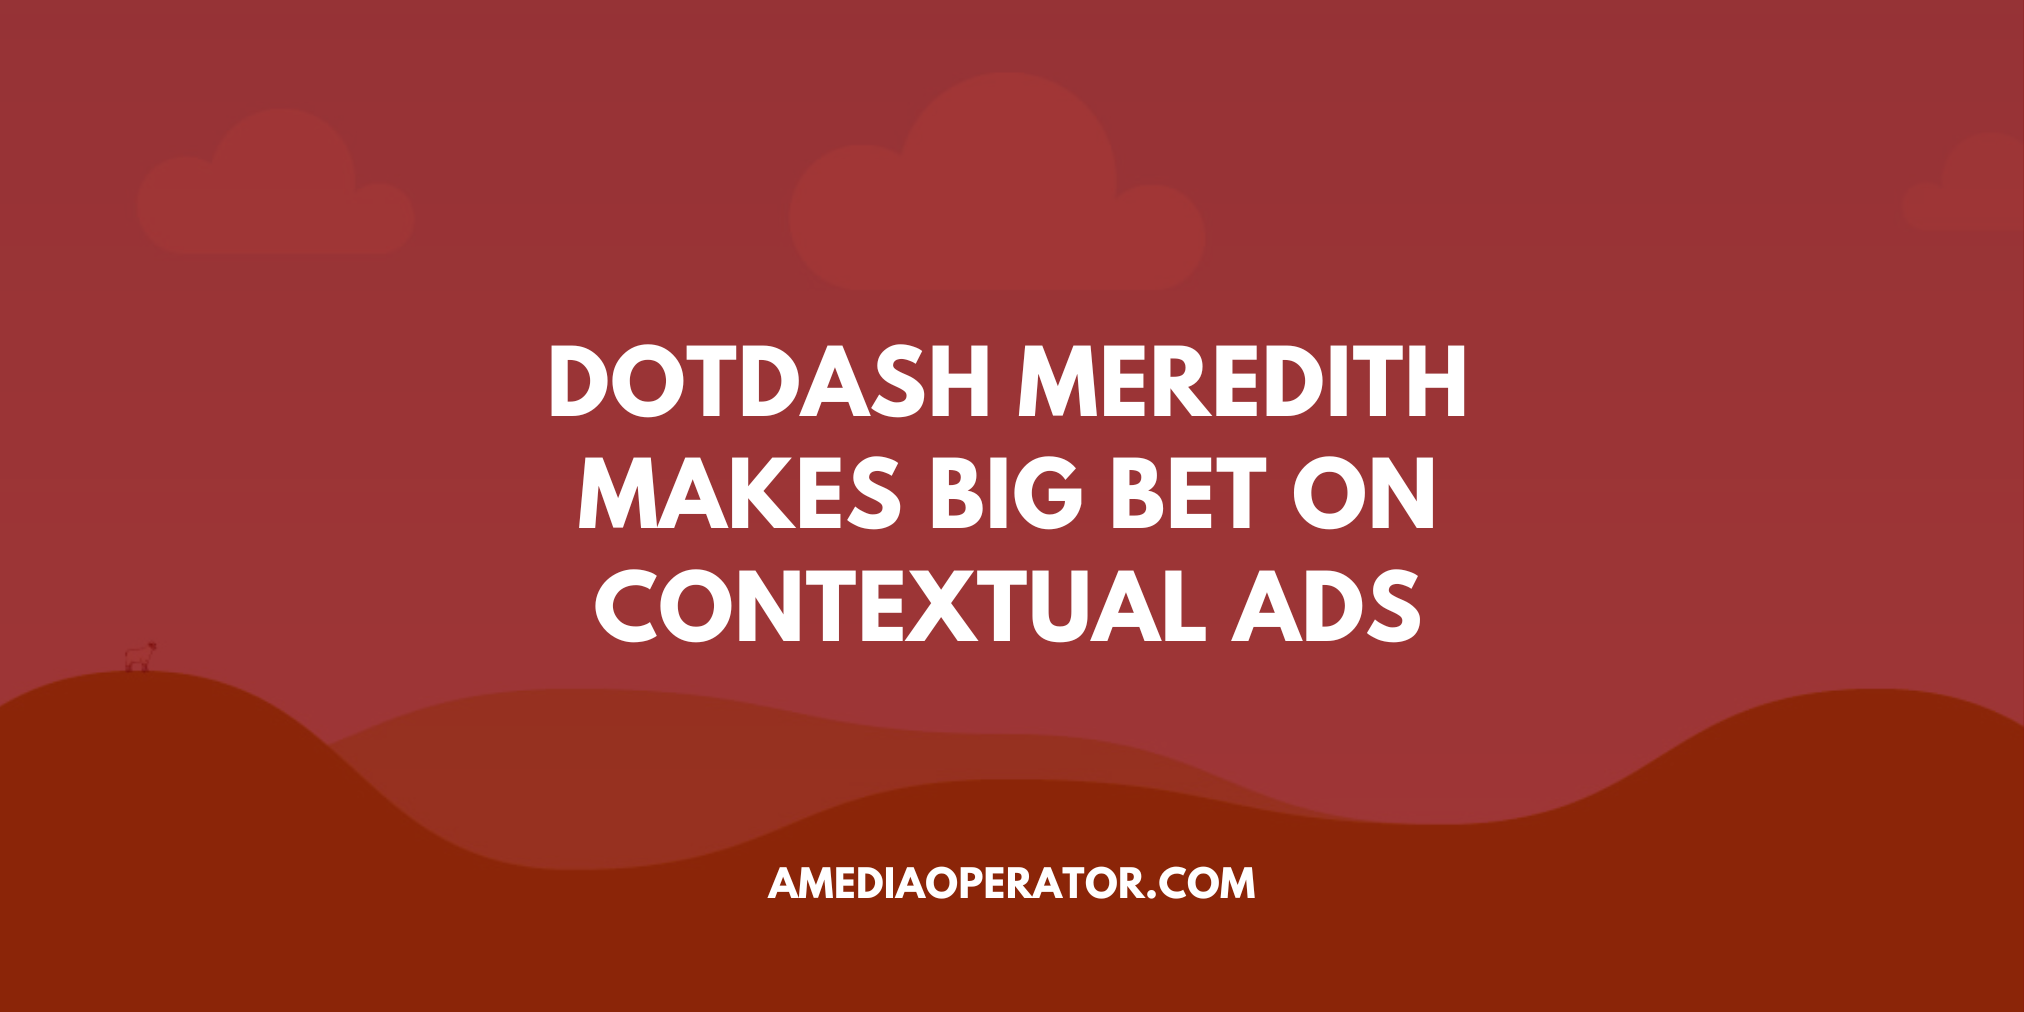 INMA: Dotdash Meredith targets ads without cookies, prioritises